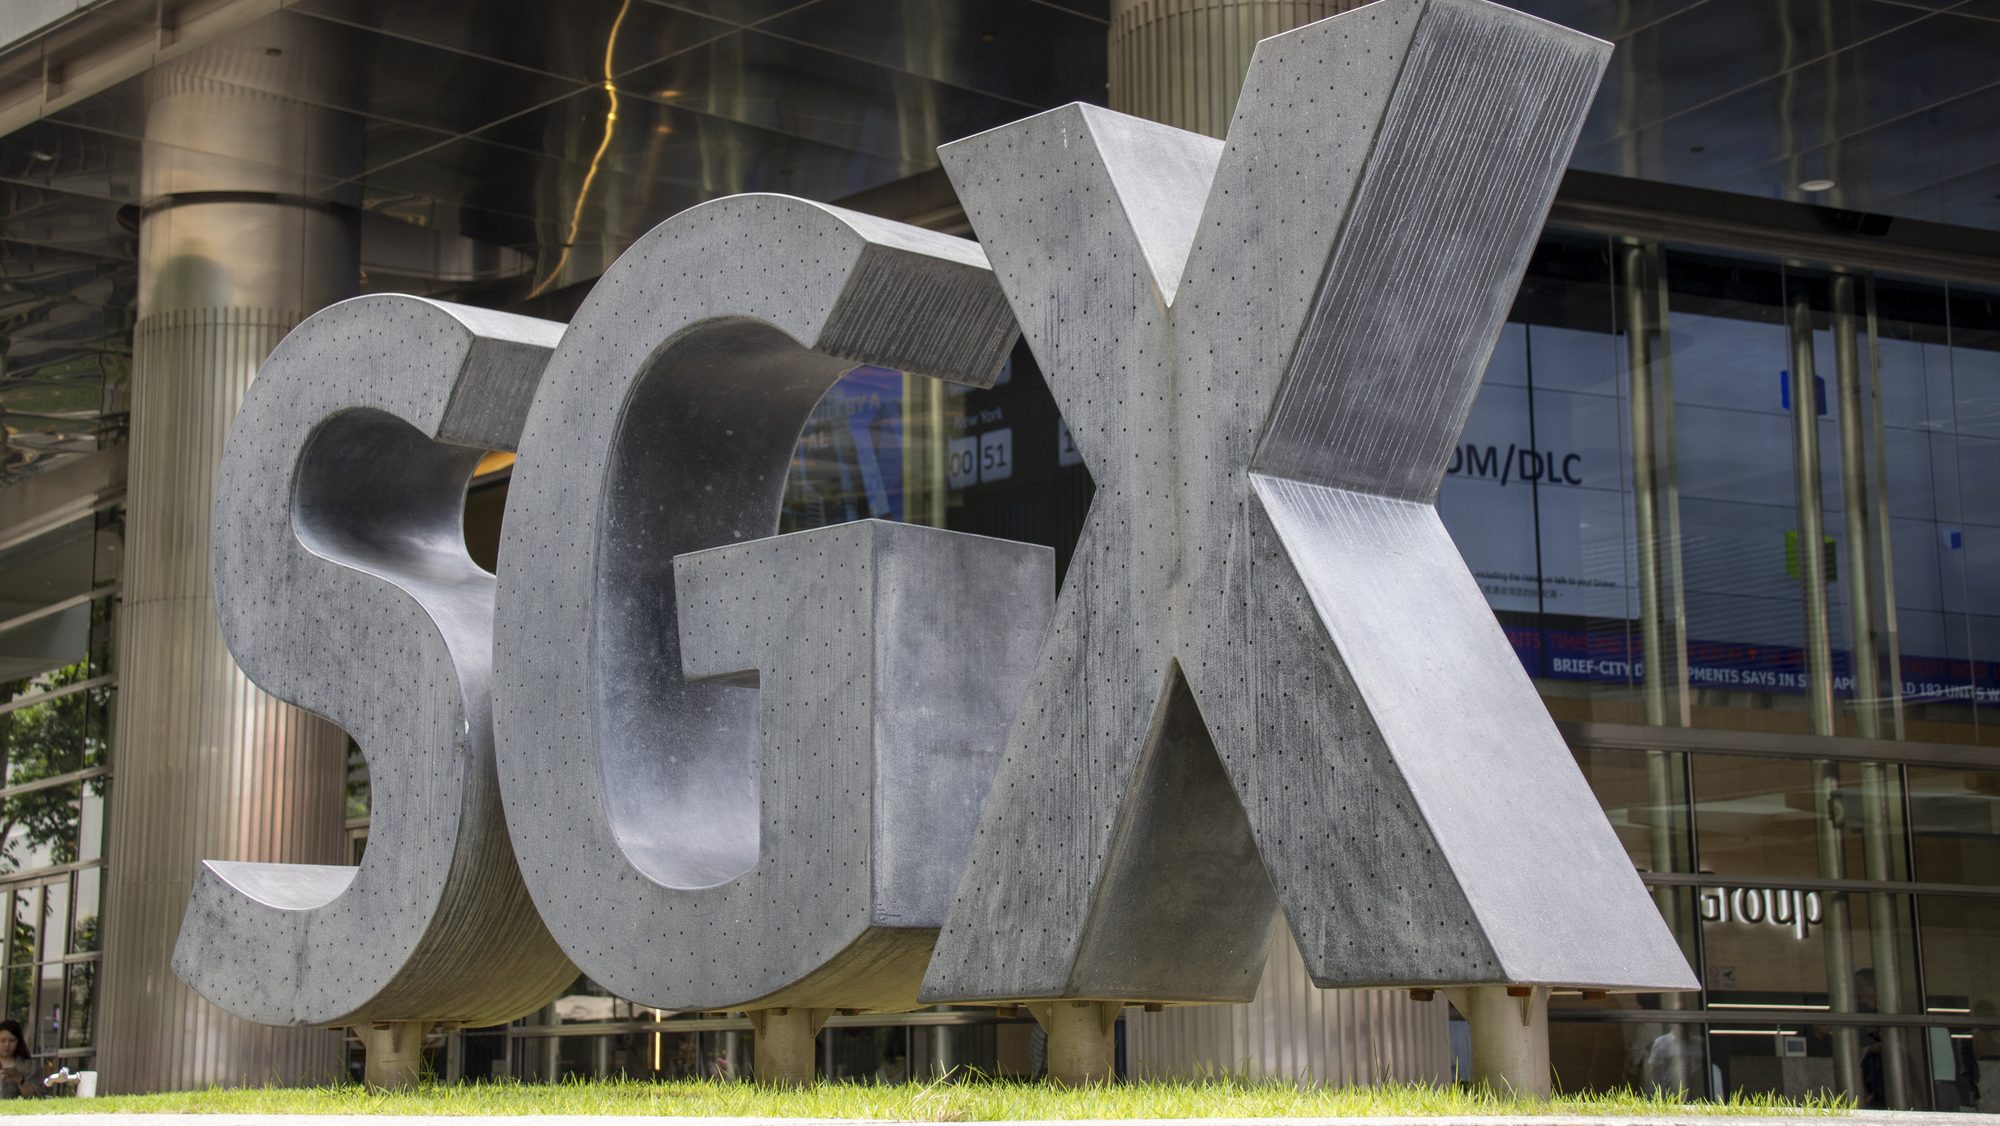 Sign of SGX, Singapore Exchange Limited, located in Singapore. SGX Centre is a twin tower high-rise complex in the city of Singapore